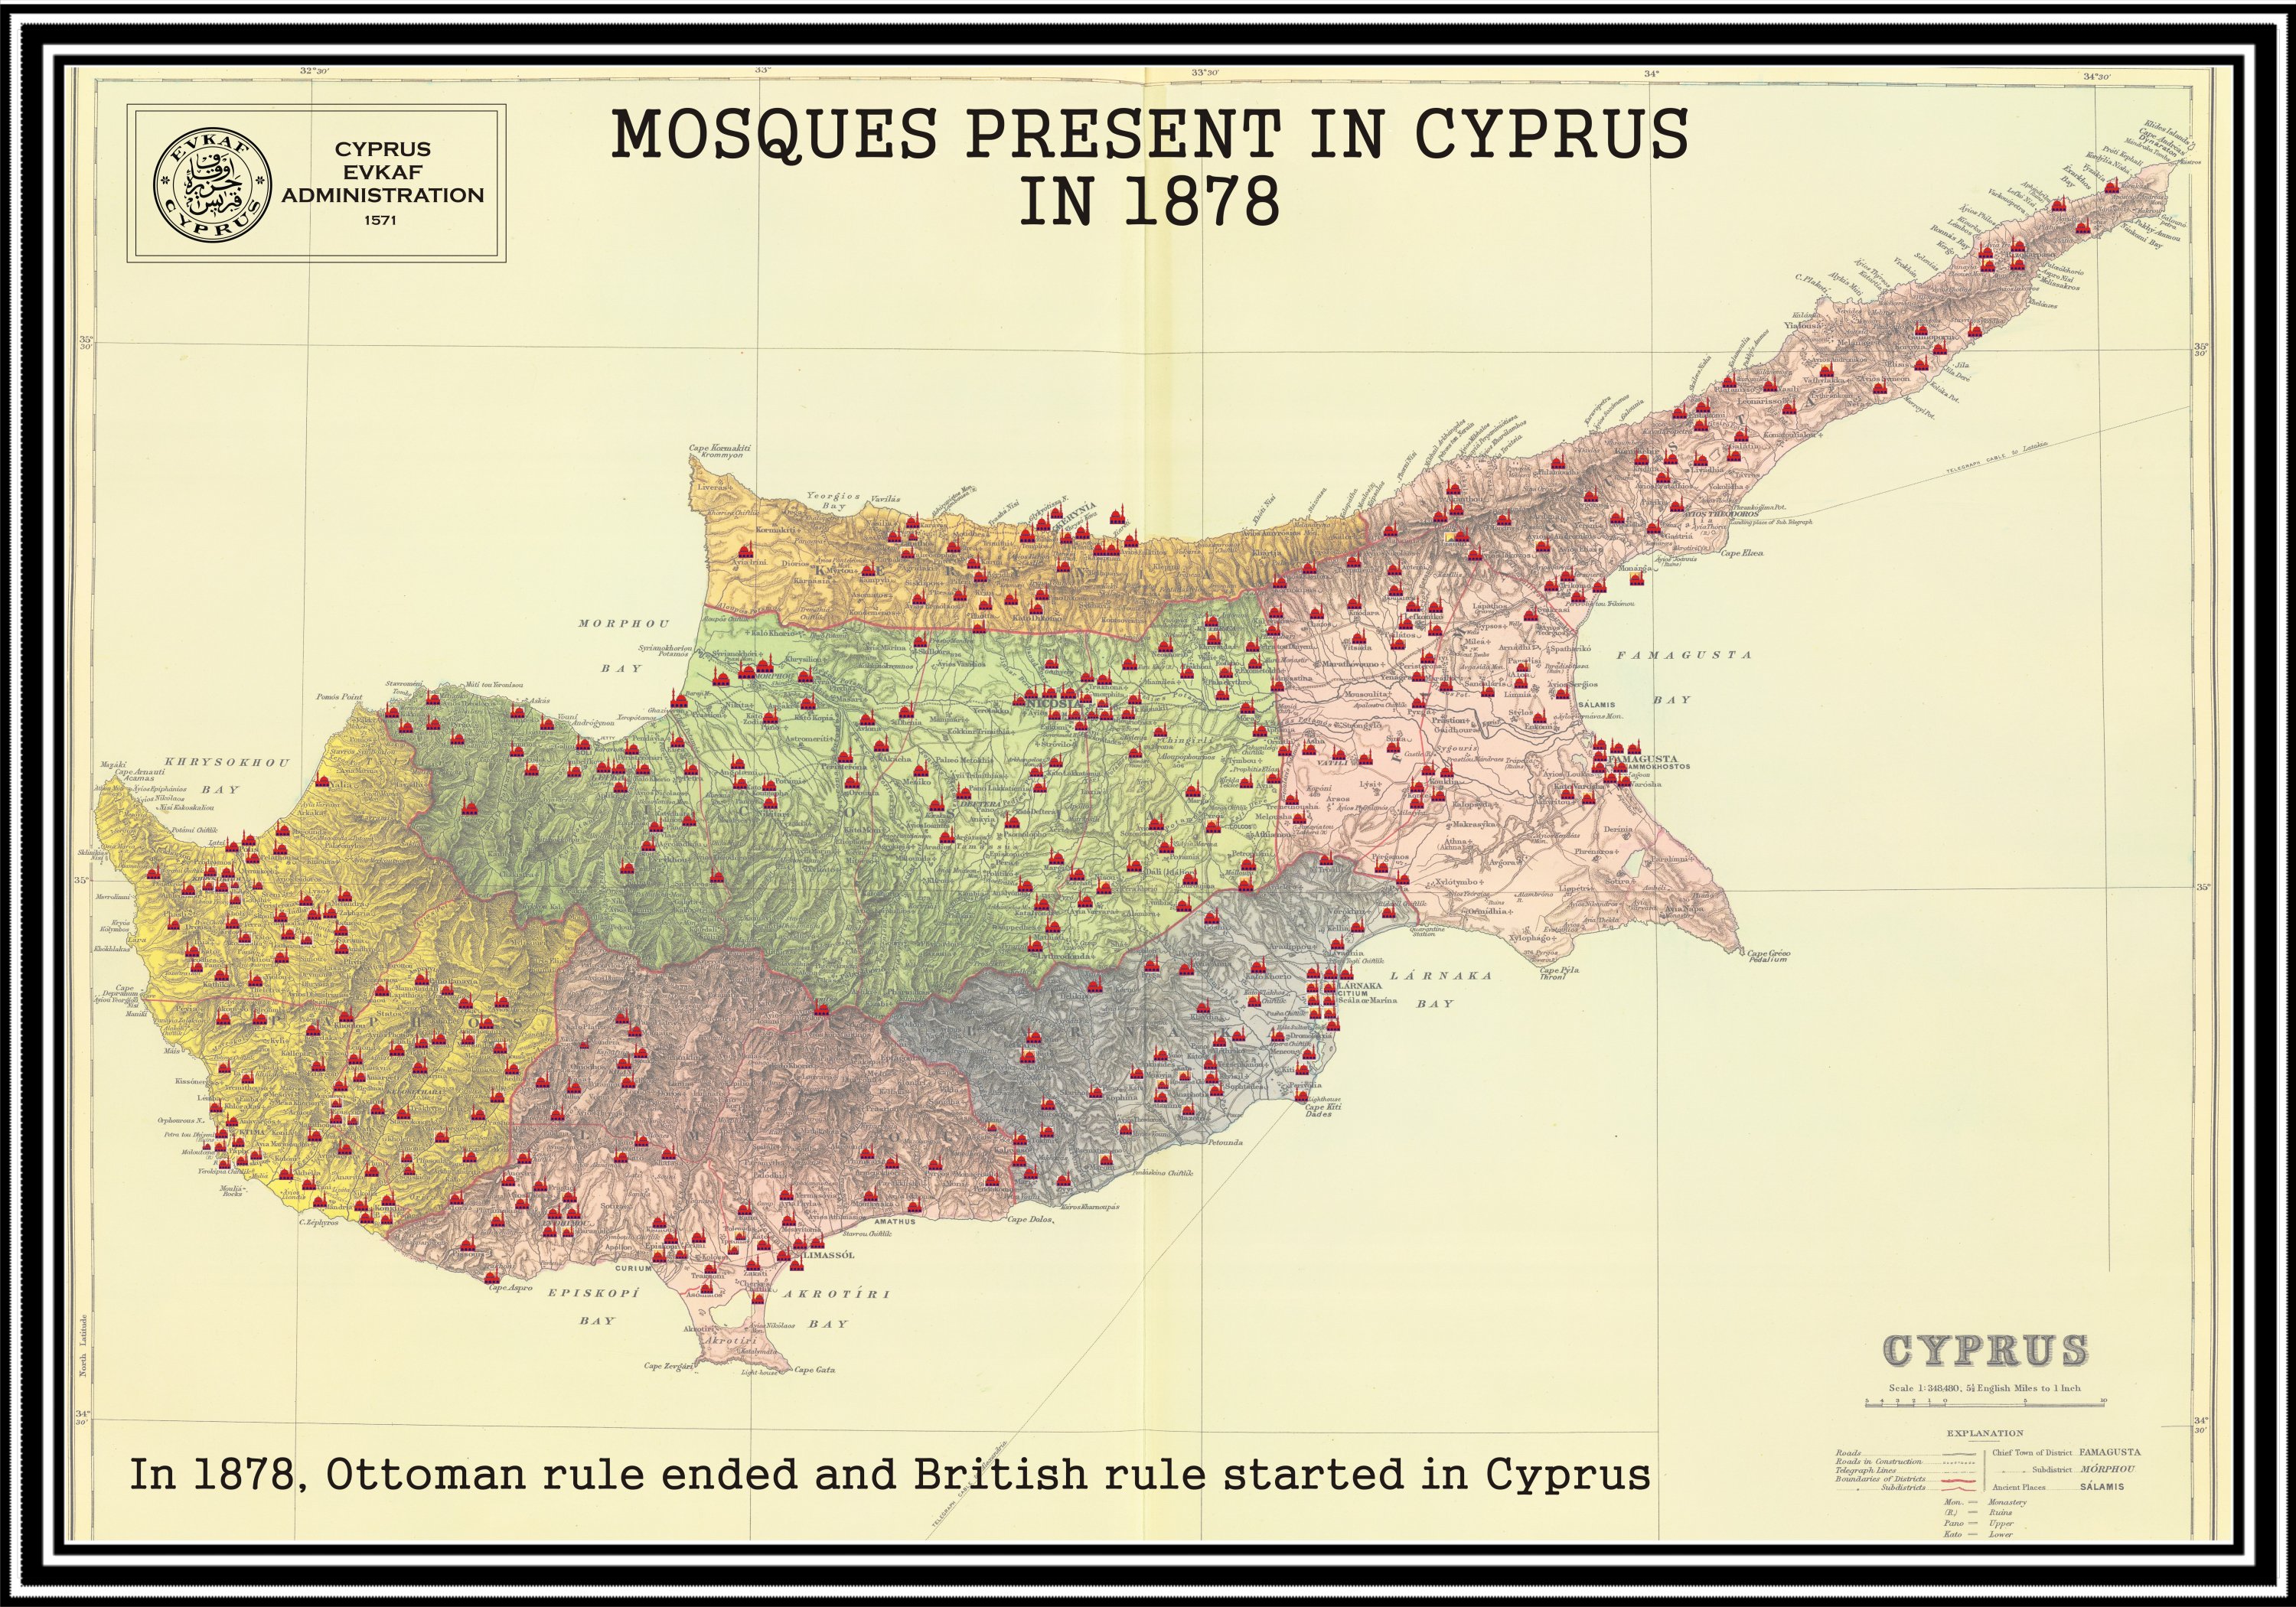 This map provided by the Evkaf Foundation shows mosques administered by the foundation in Cyprus in 1878, when the British assumed the control of the island from the Ottomans.